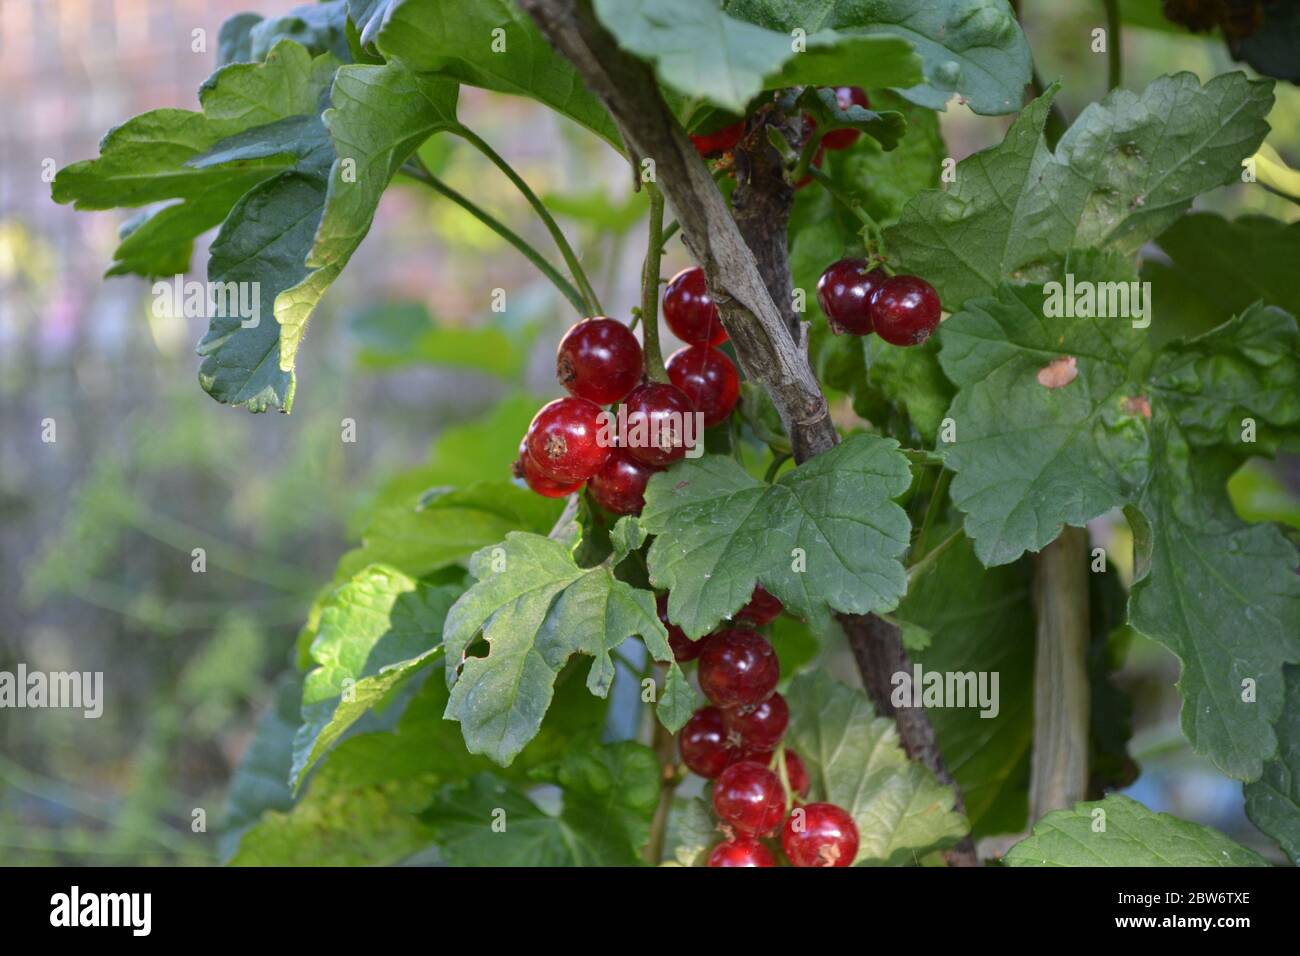 Home garden, flower bed. Gardening. Green leaves, bushes. Red juicy berries. Tasty and healthy. Red currant, ordinary, garden. Small deciduous shrub f Stock Photo